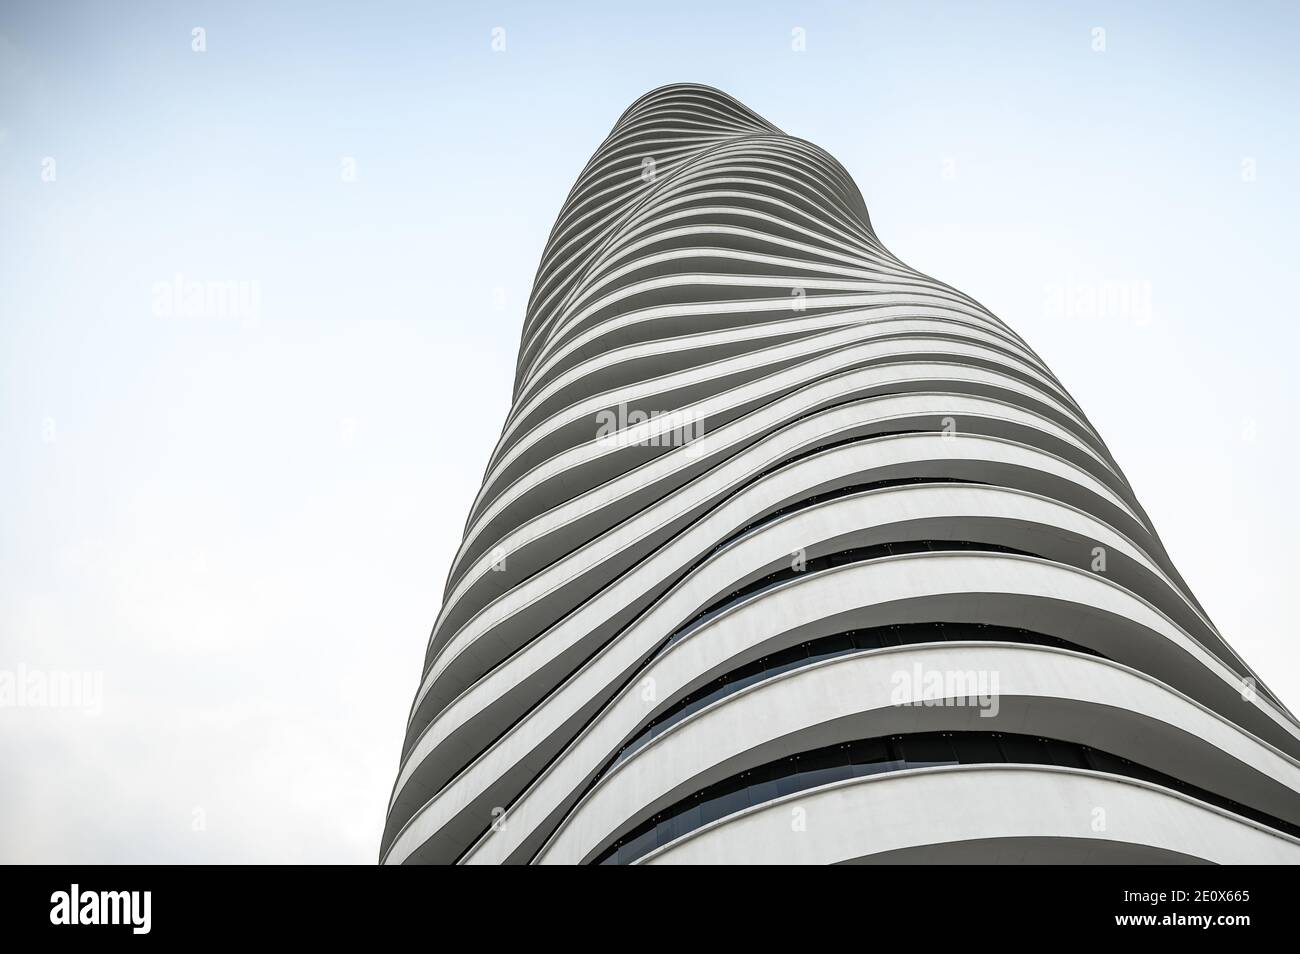 A view from below of The Point building in Puerto Santa Ana, Guayaquil, Ecuador. Stock Photo